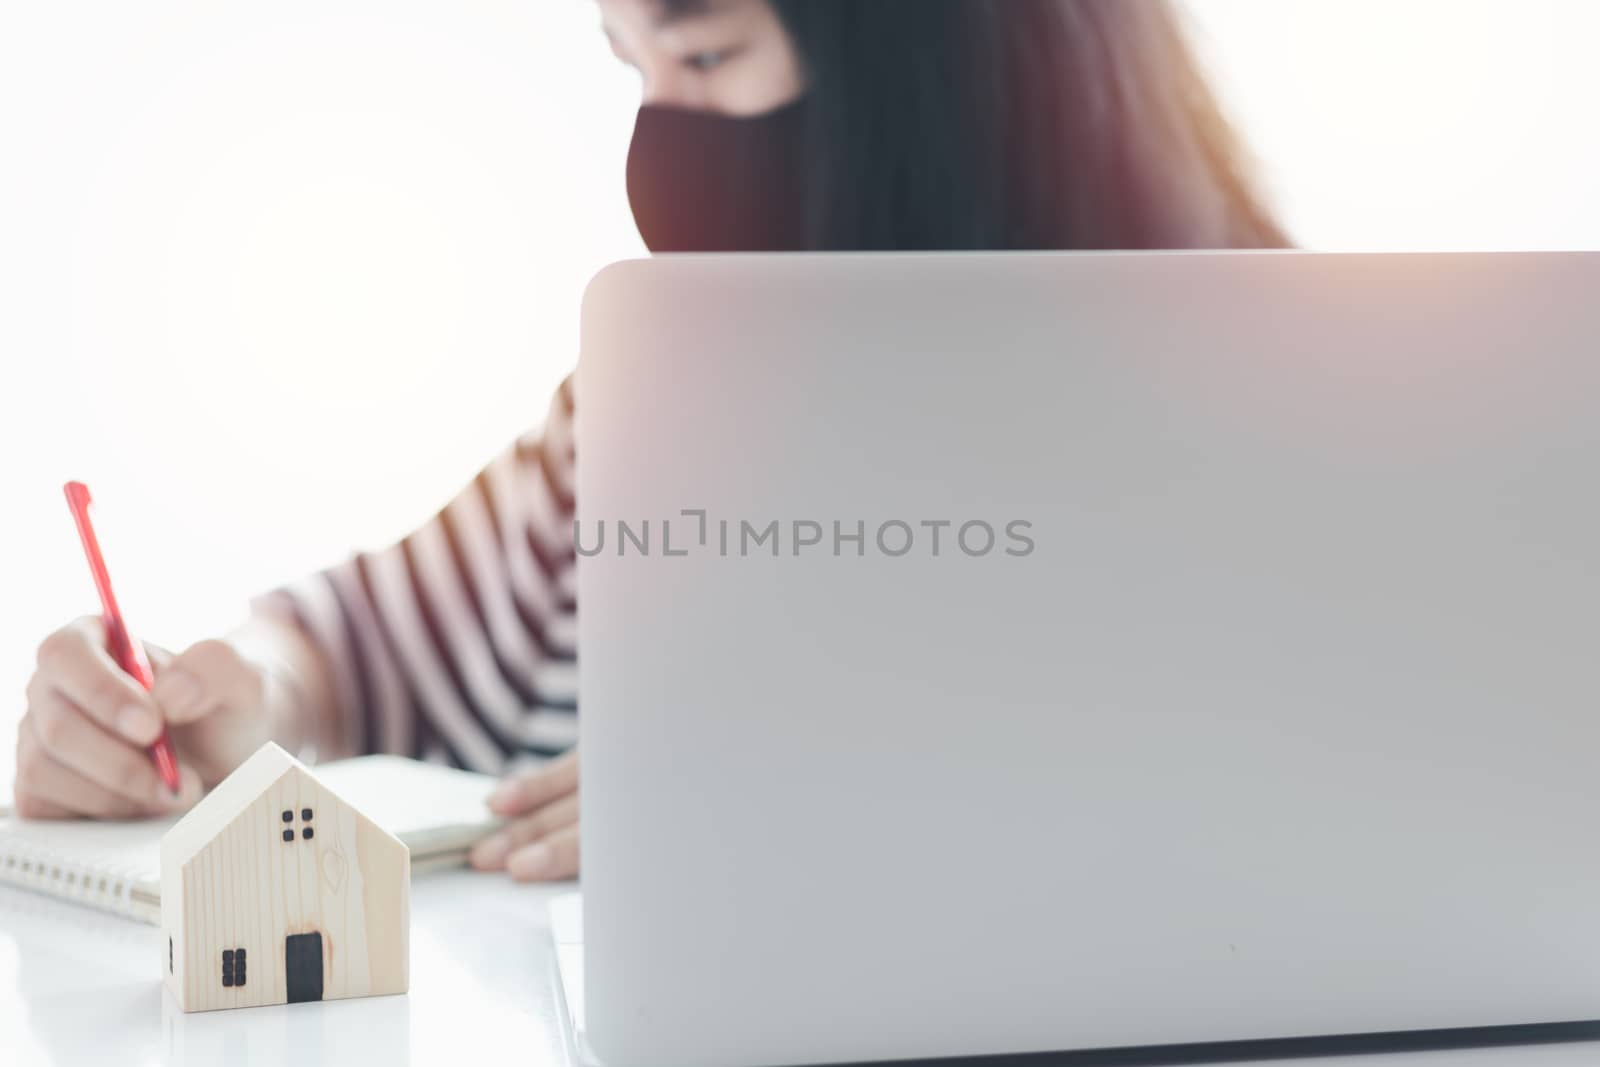 Woman using laptop and working at home for business, self-quarantine, staying home and social distancing in coronavirus or Covid-2019 outbreak situation concept